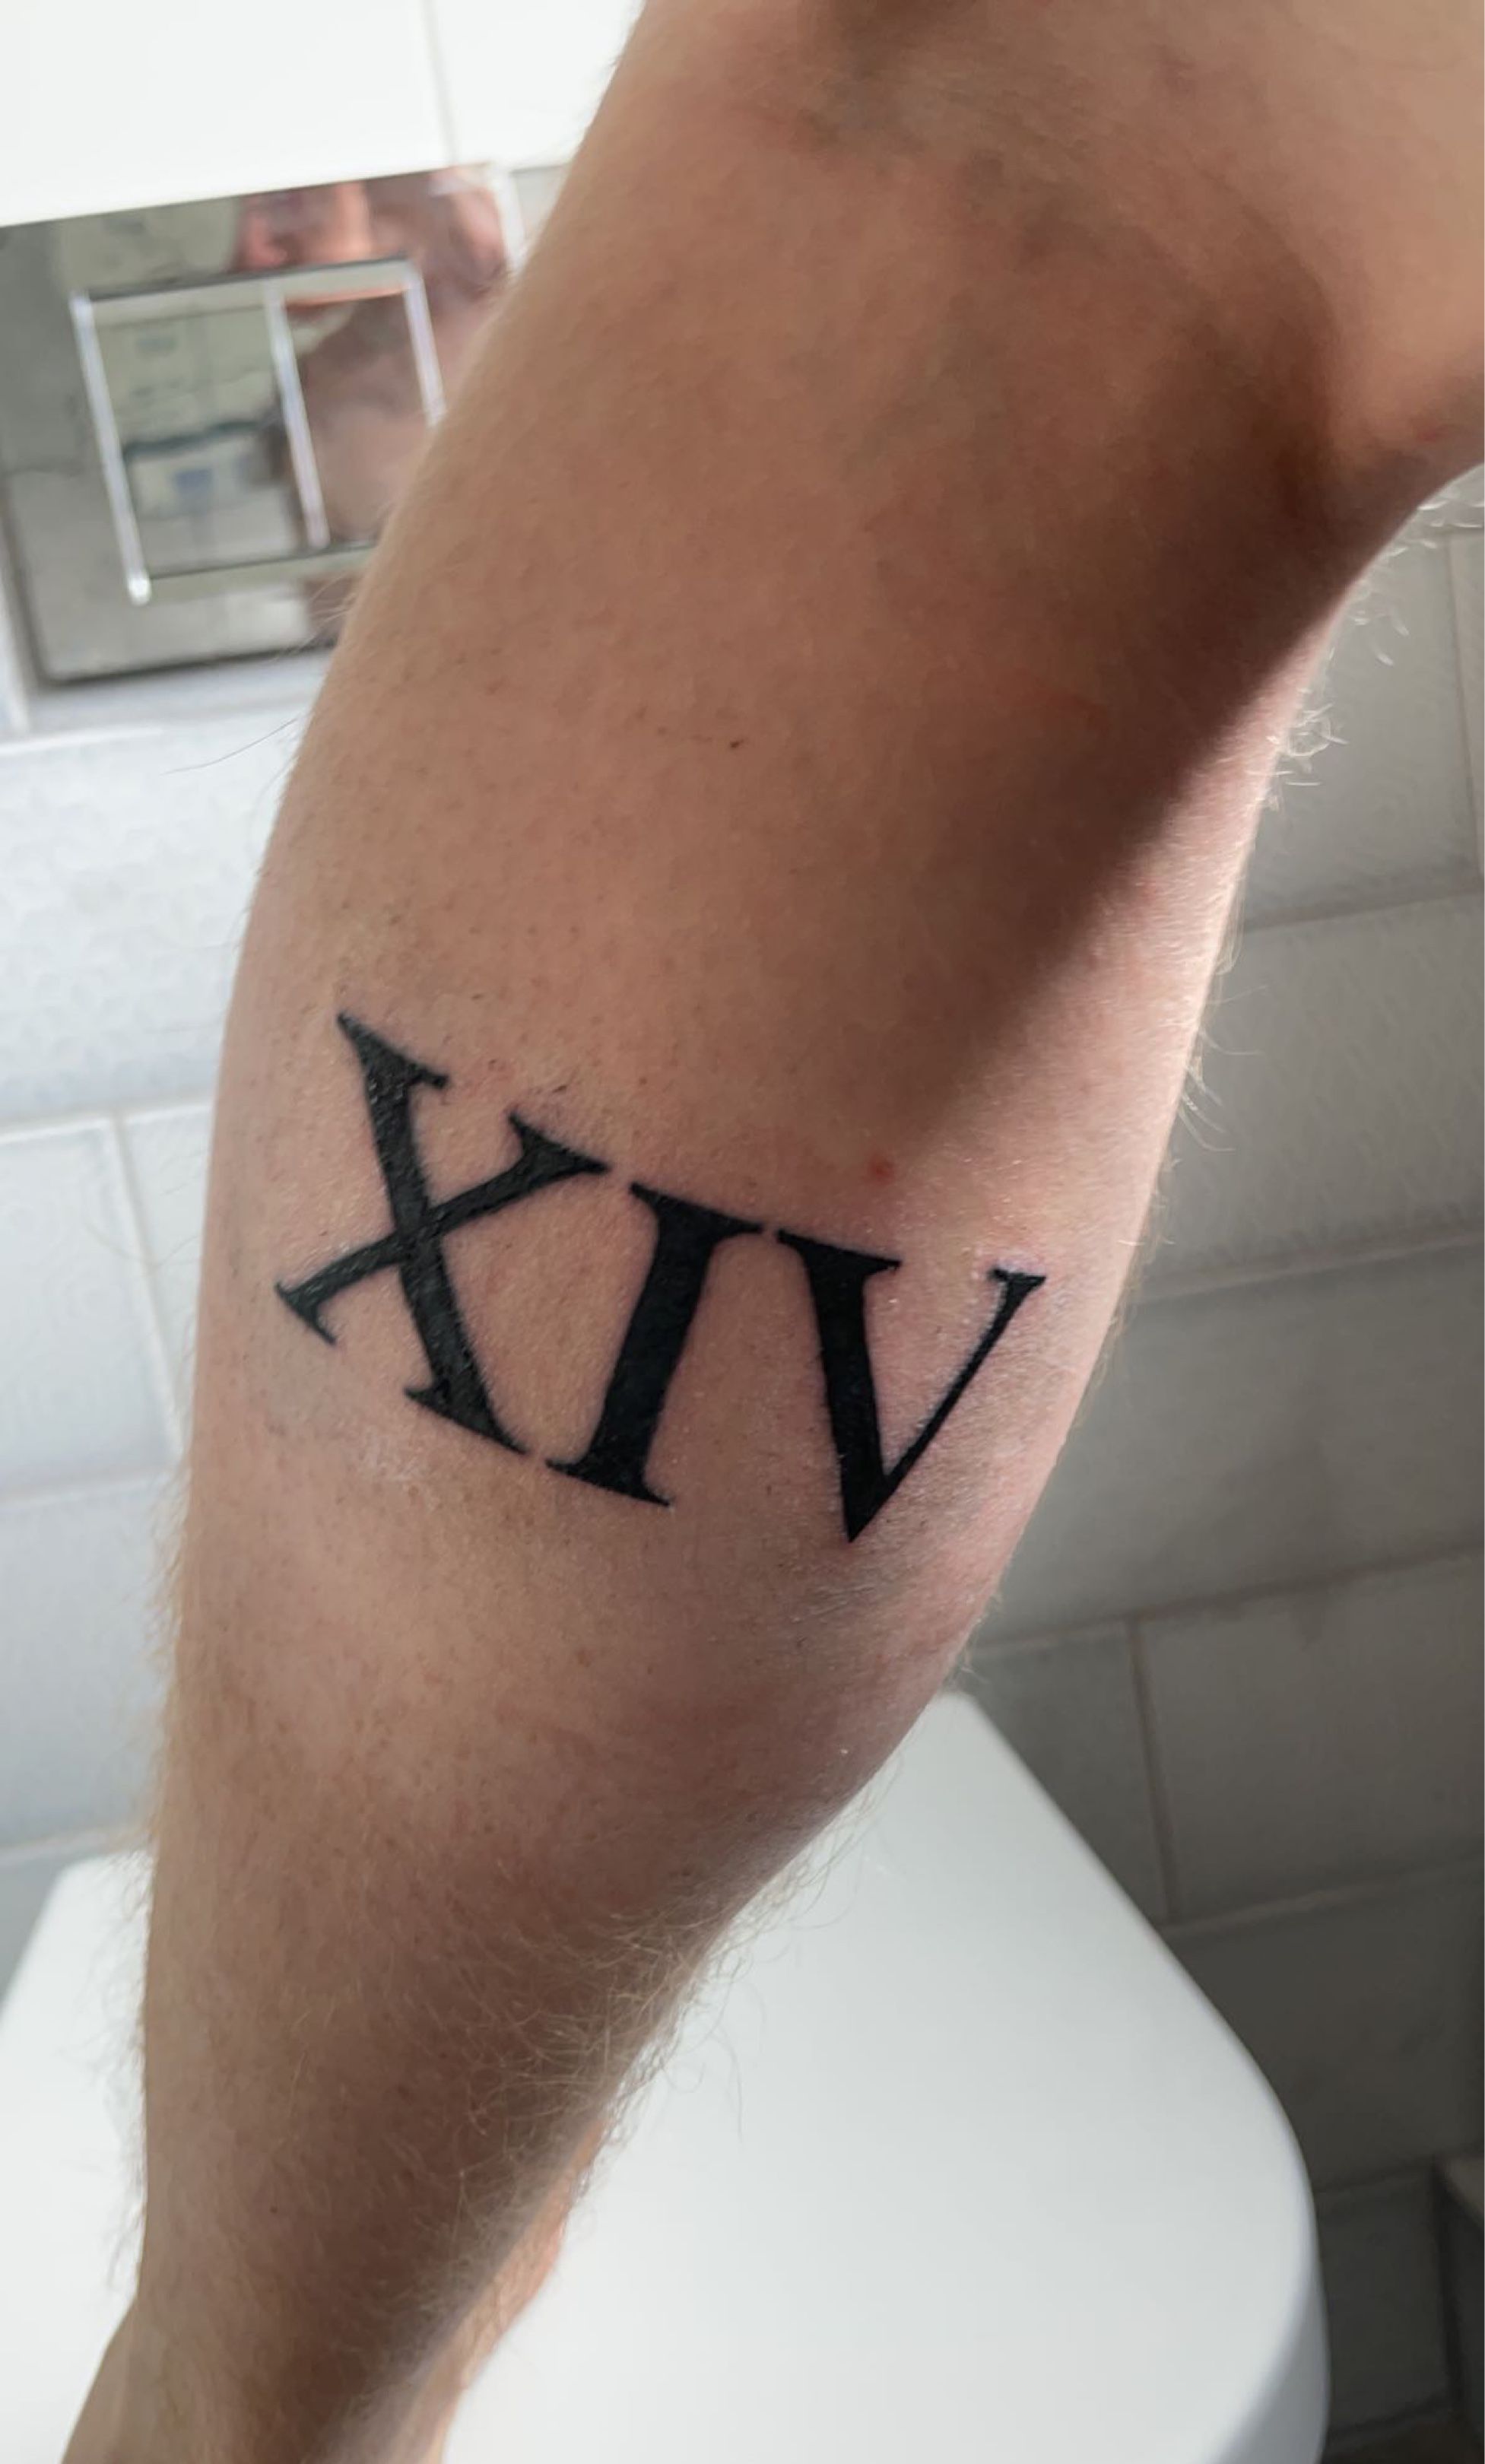 Cool and Classic Roman Numerals Tattoo Designs | by financerexpres | Medium